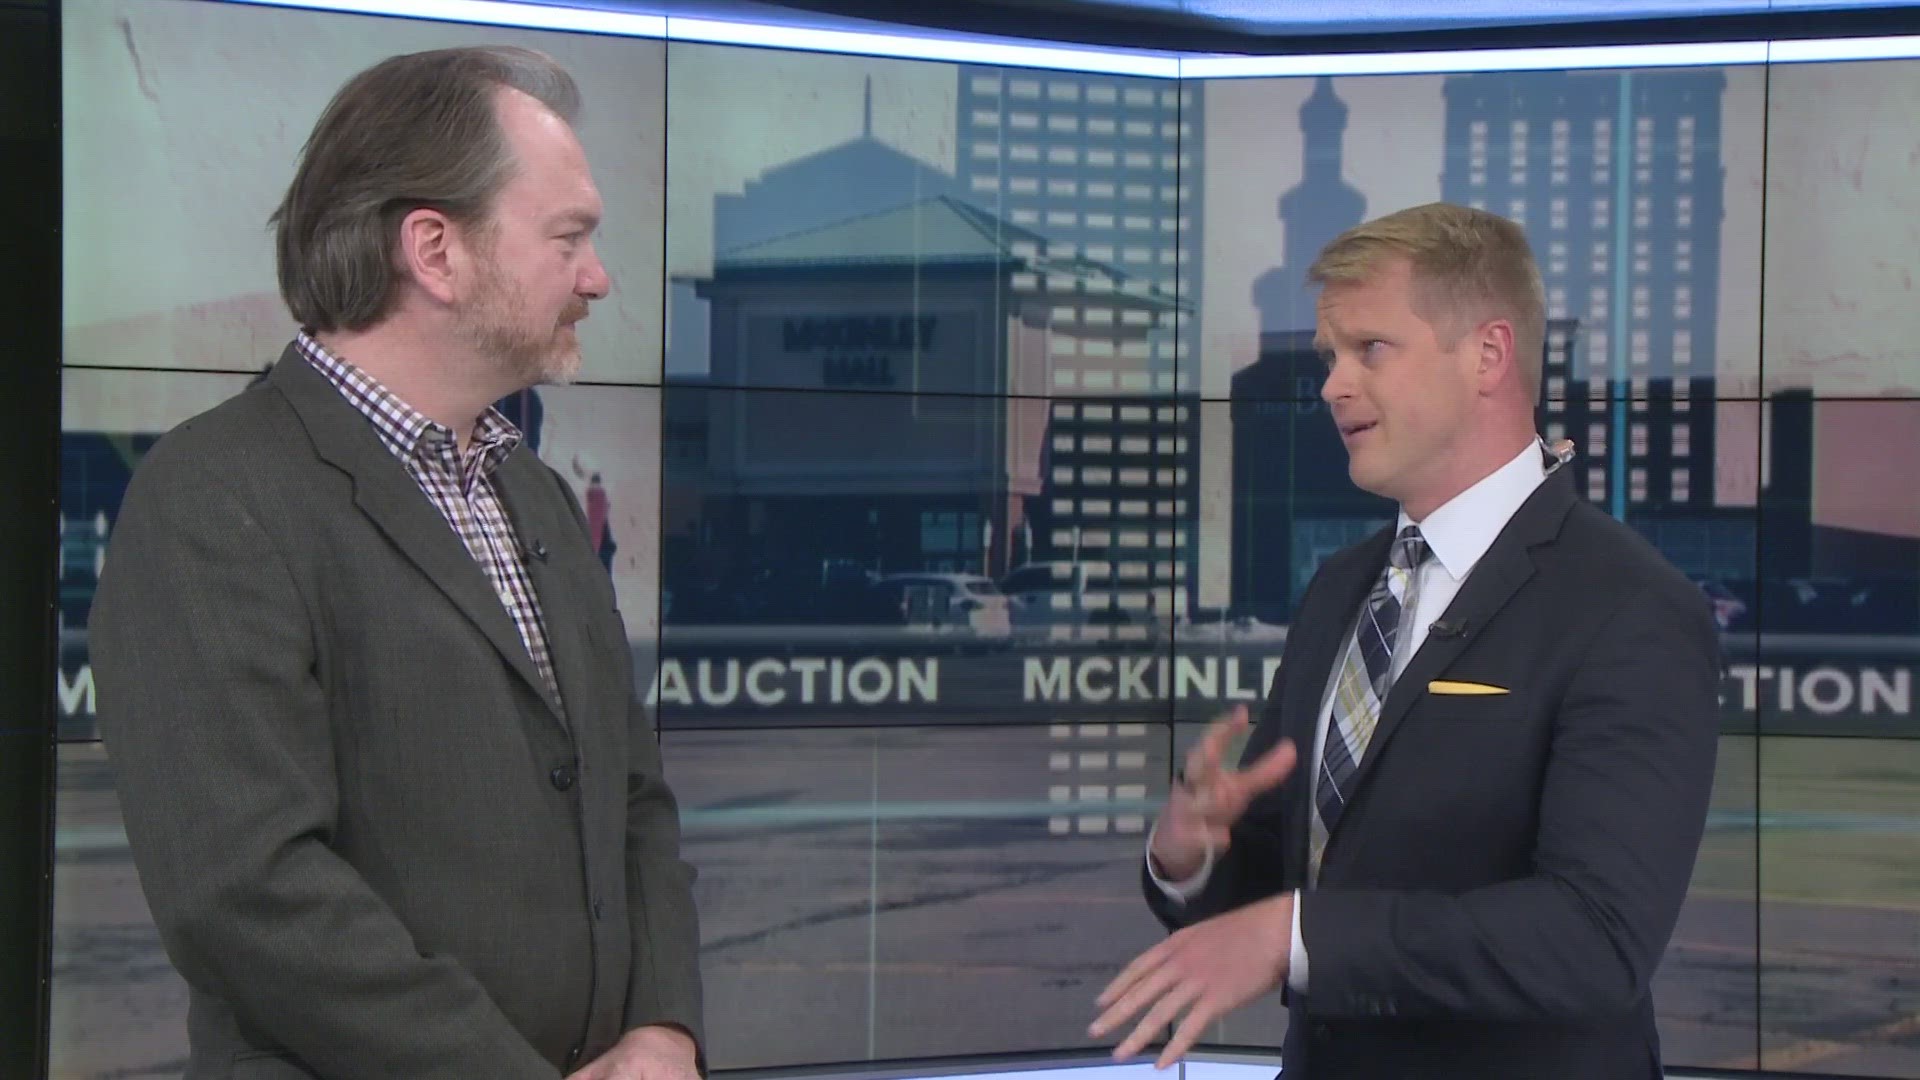 Hamburg's Town Supervisor Randy Hoak joins us to discuss the future of McKinley Mall.